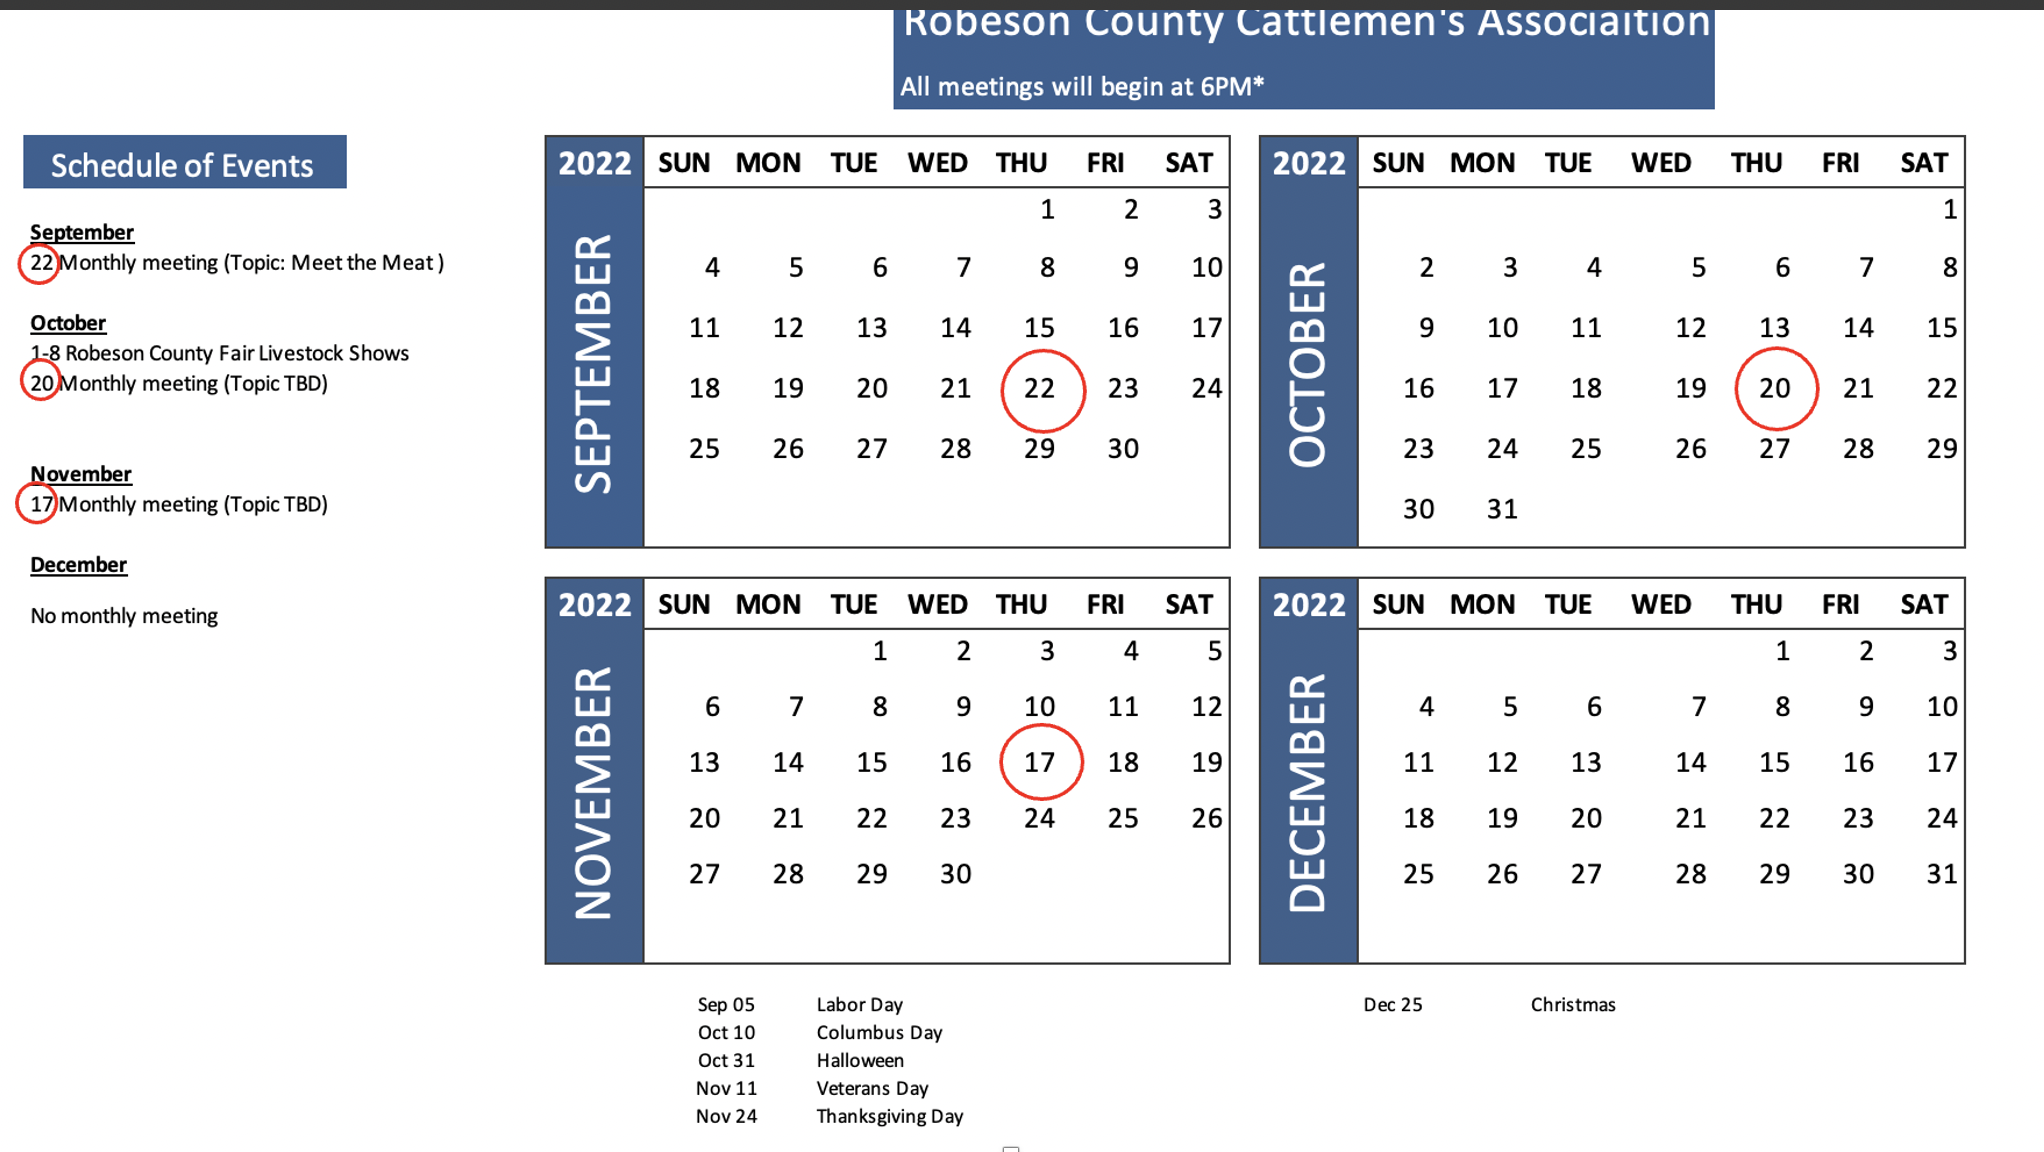 Calendars showing Monthly meetings on September 22, October 20, and November 17.